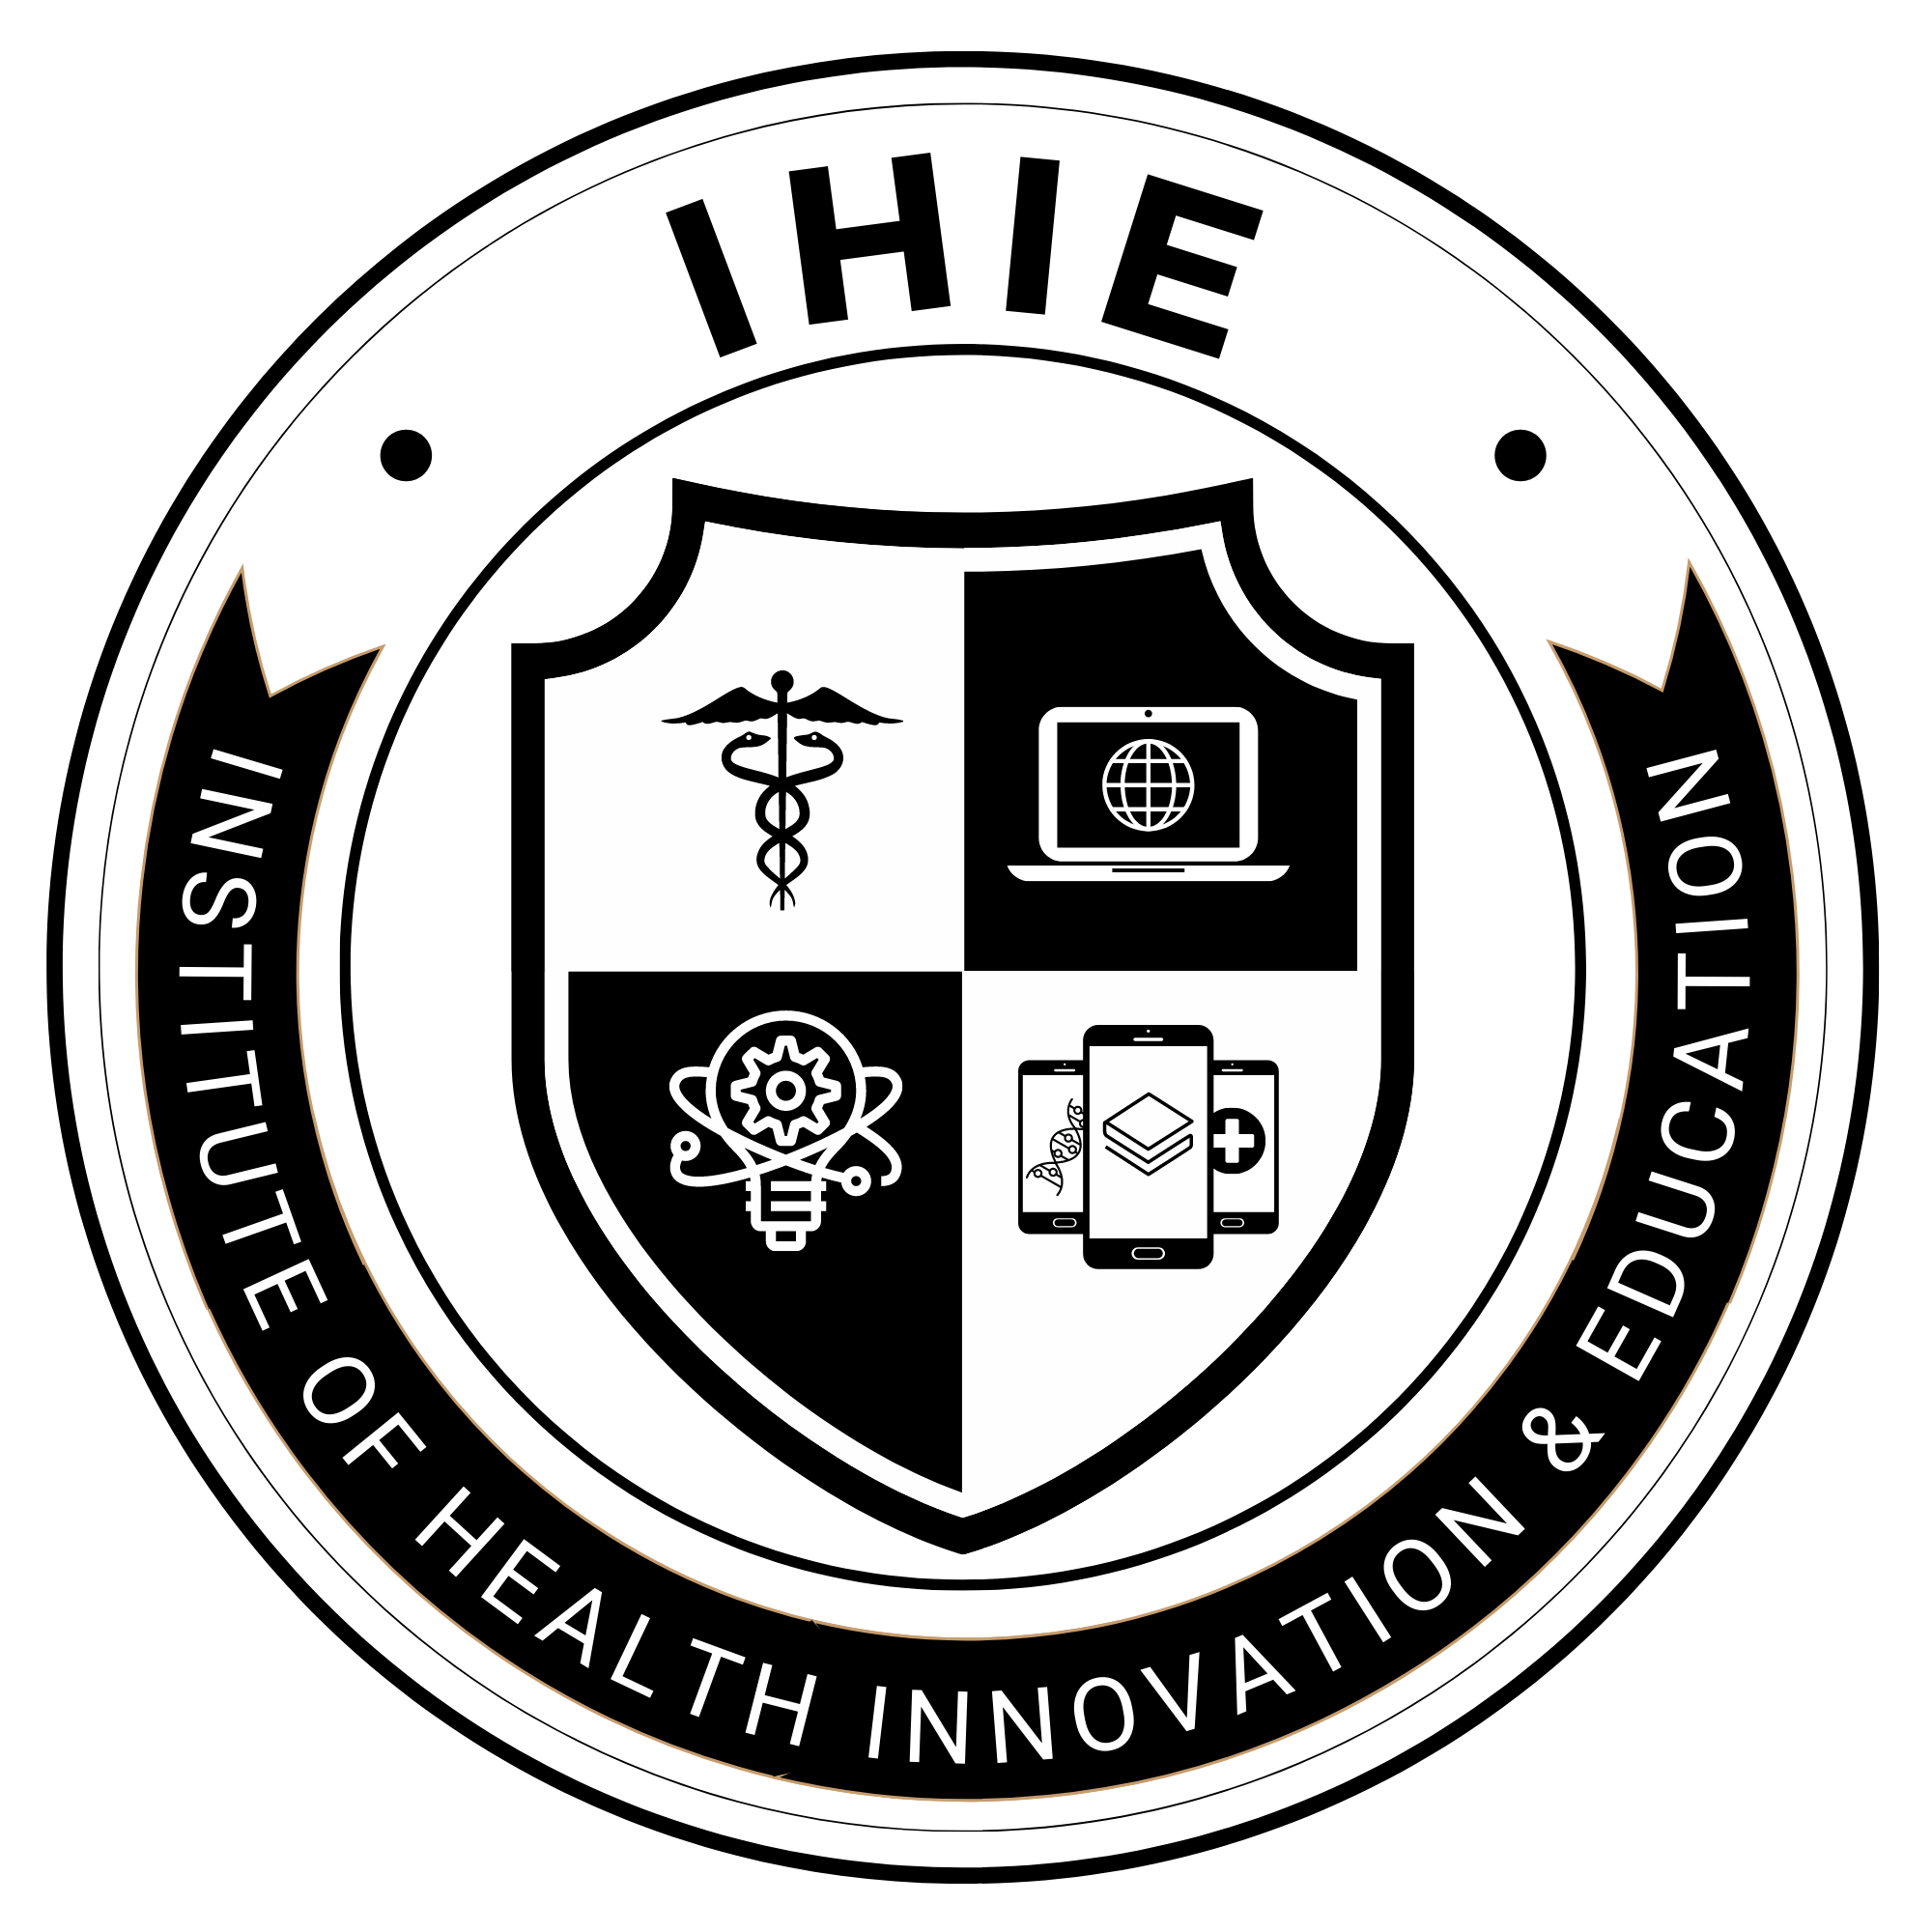 Institute of Health Innovation and Education logo